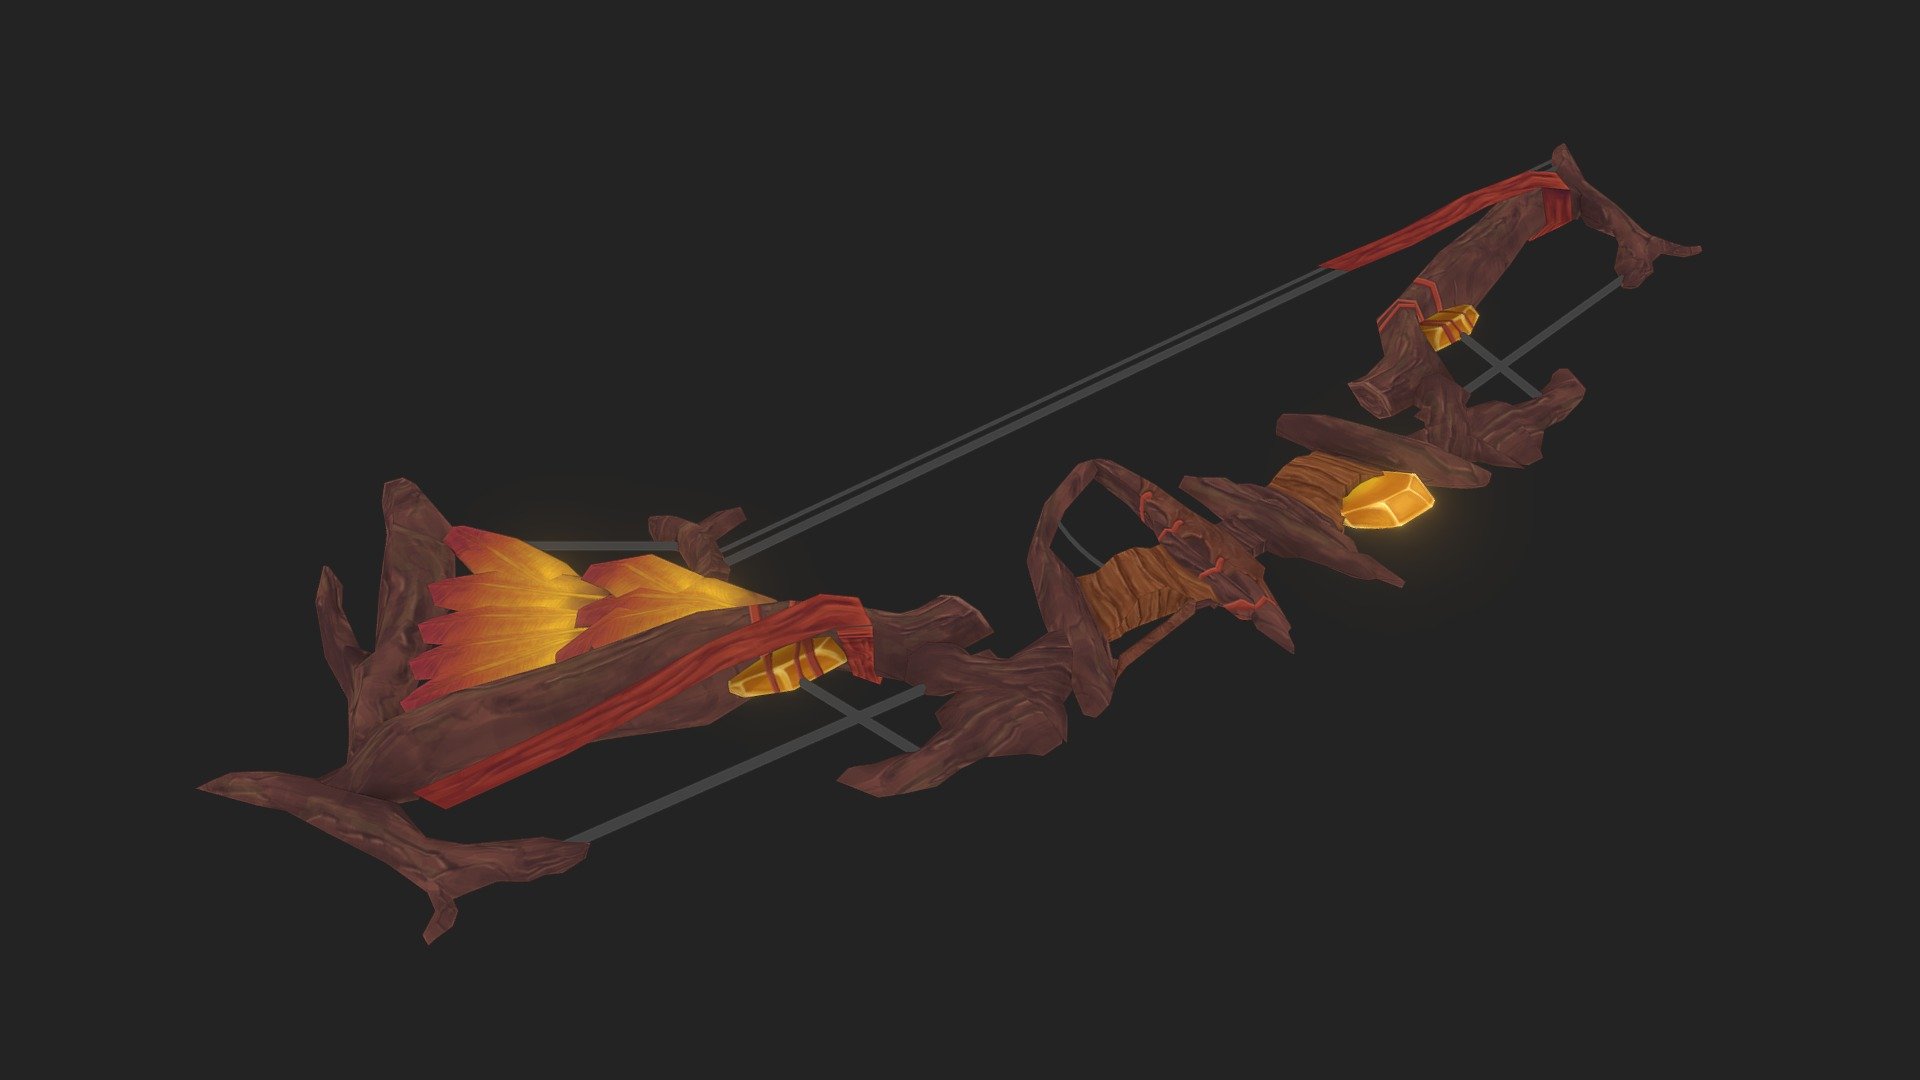 WoW Weapon - Arch of Amavi